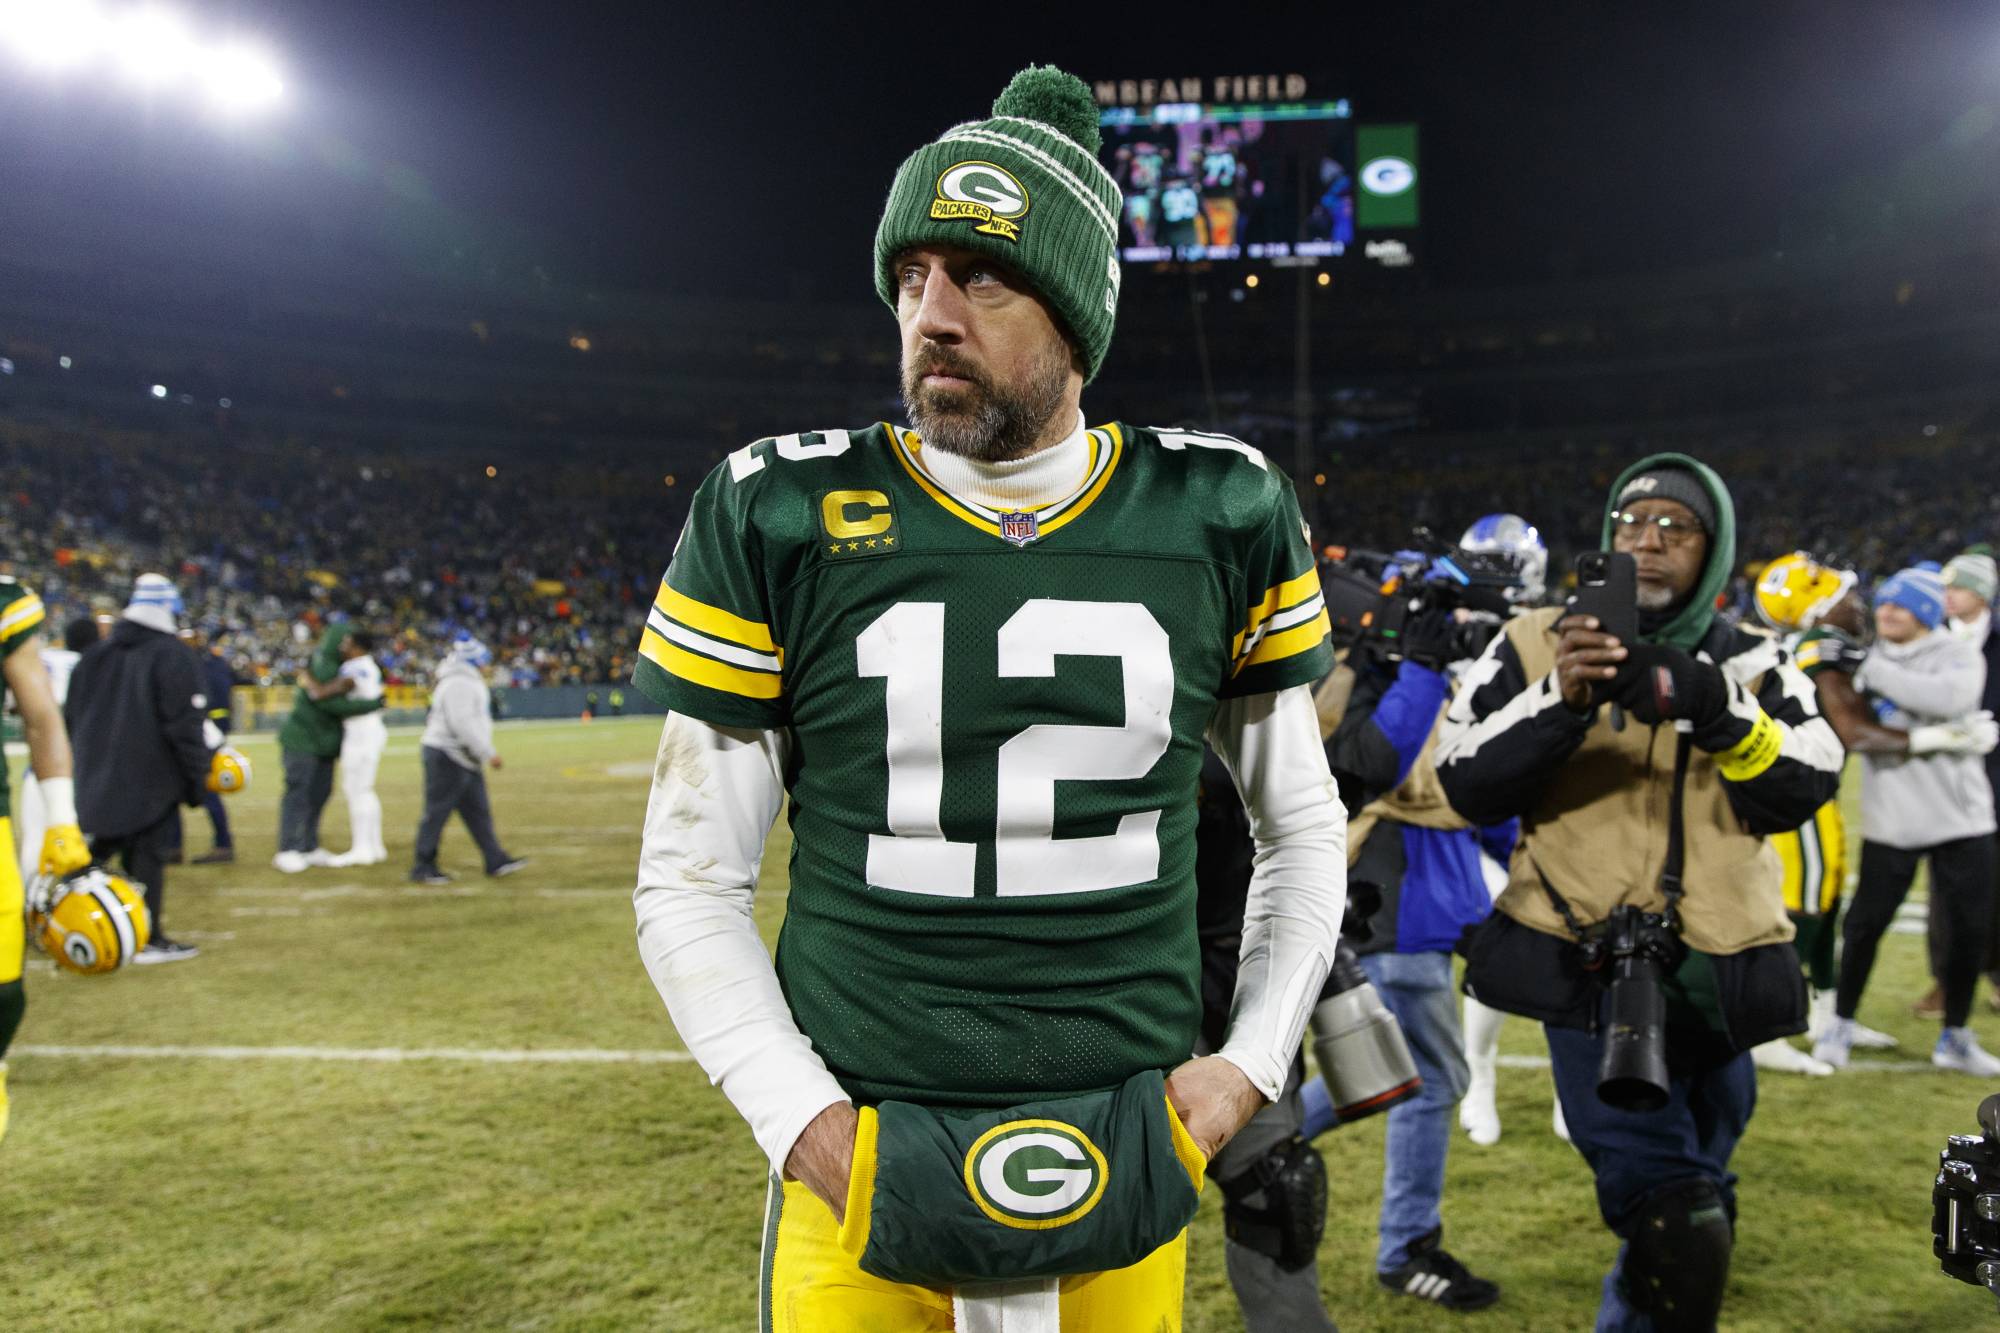 Green Bay Packers quarterback Aaron Rodgers following a game against the Detroit Lions at Lambeau Field in Green Bay, Wisconsin, on Jan 8. | USA TODAY/ VIA REUTERS